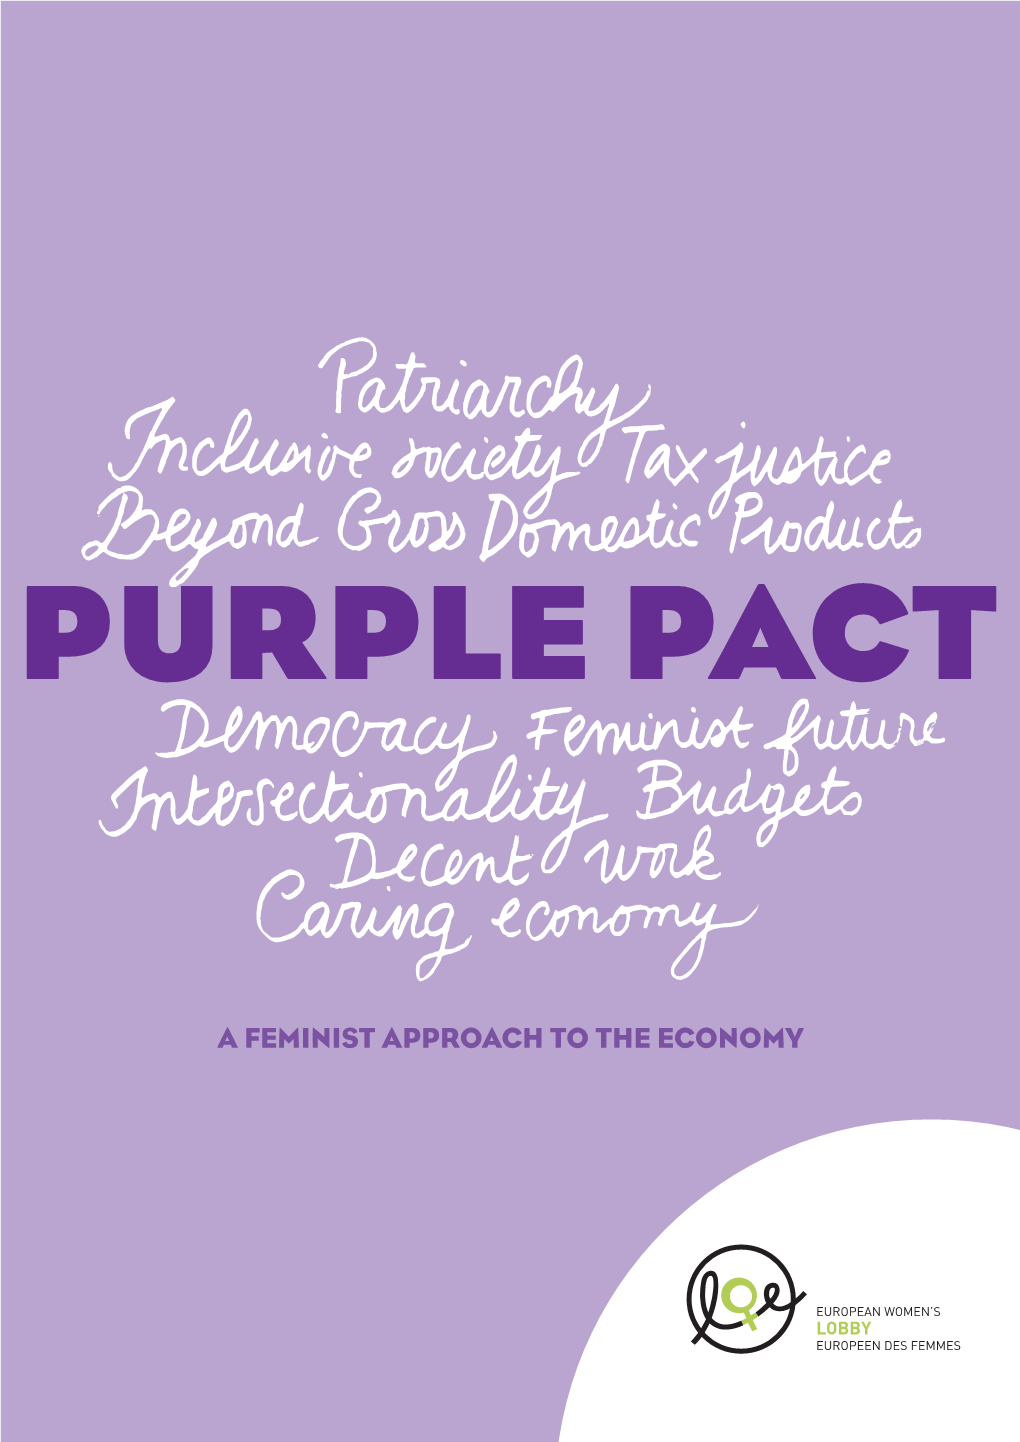 Purple Pact: a Feminist Approach to the Economy